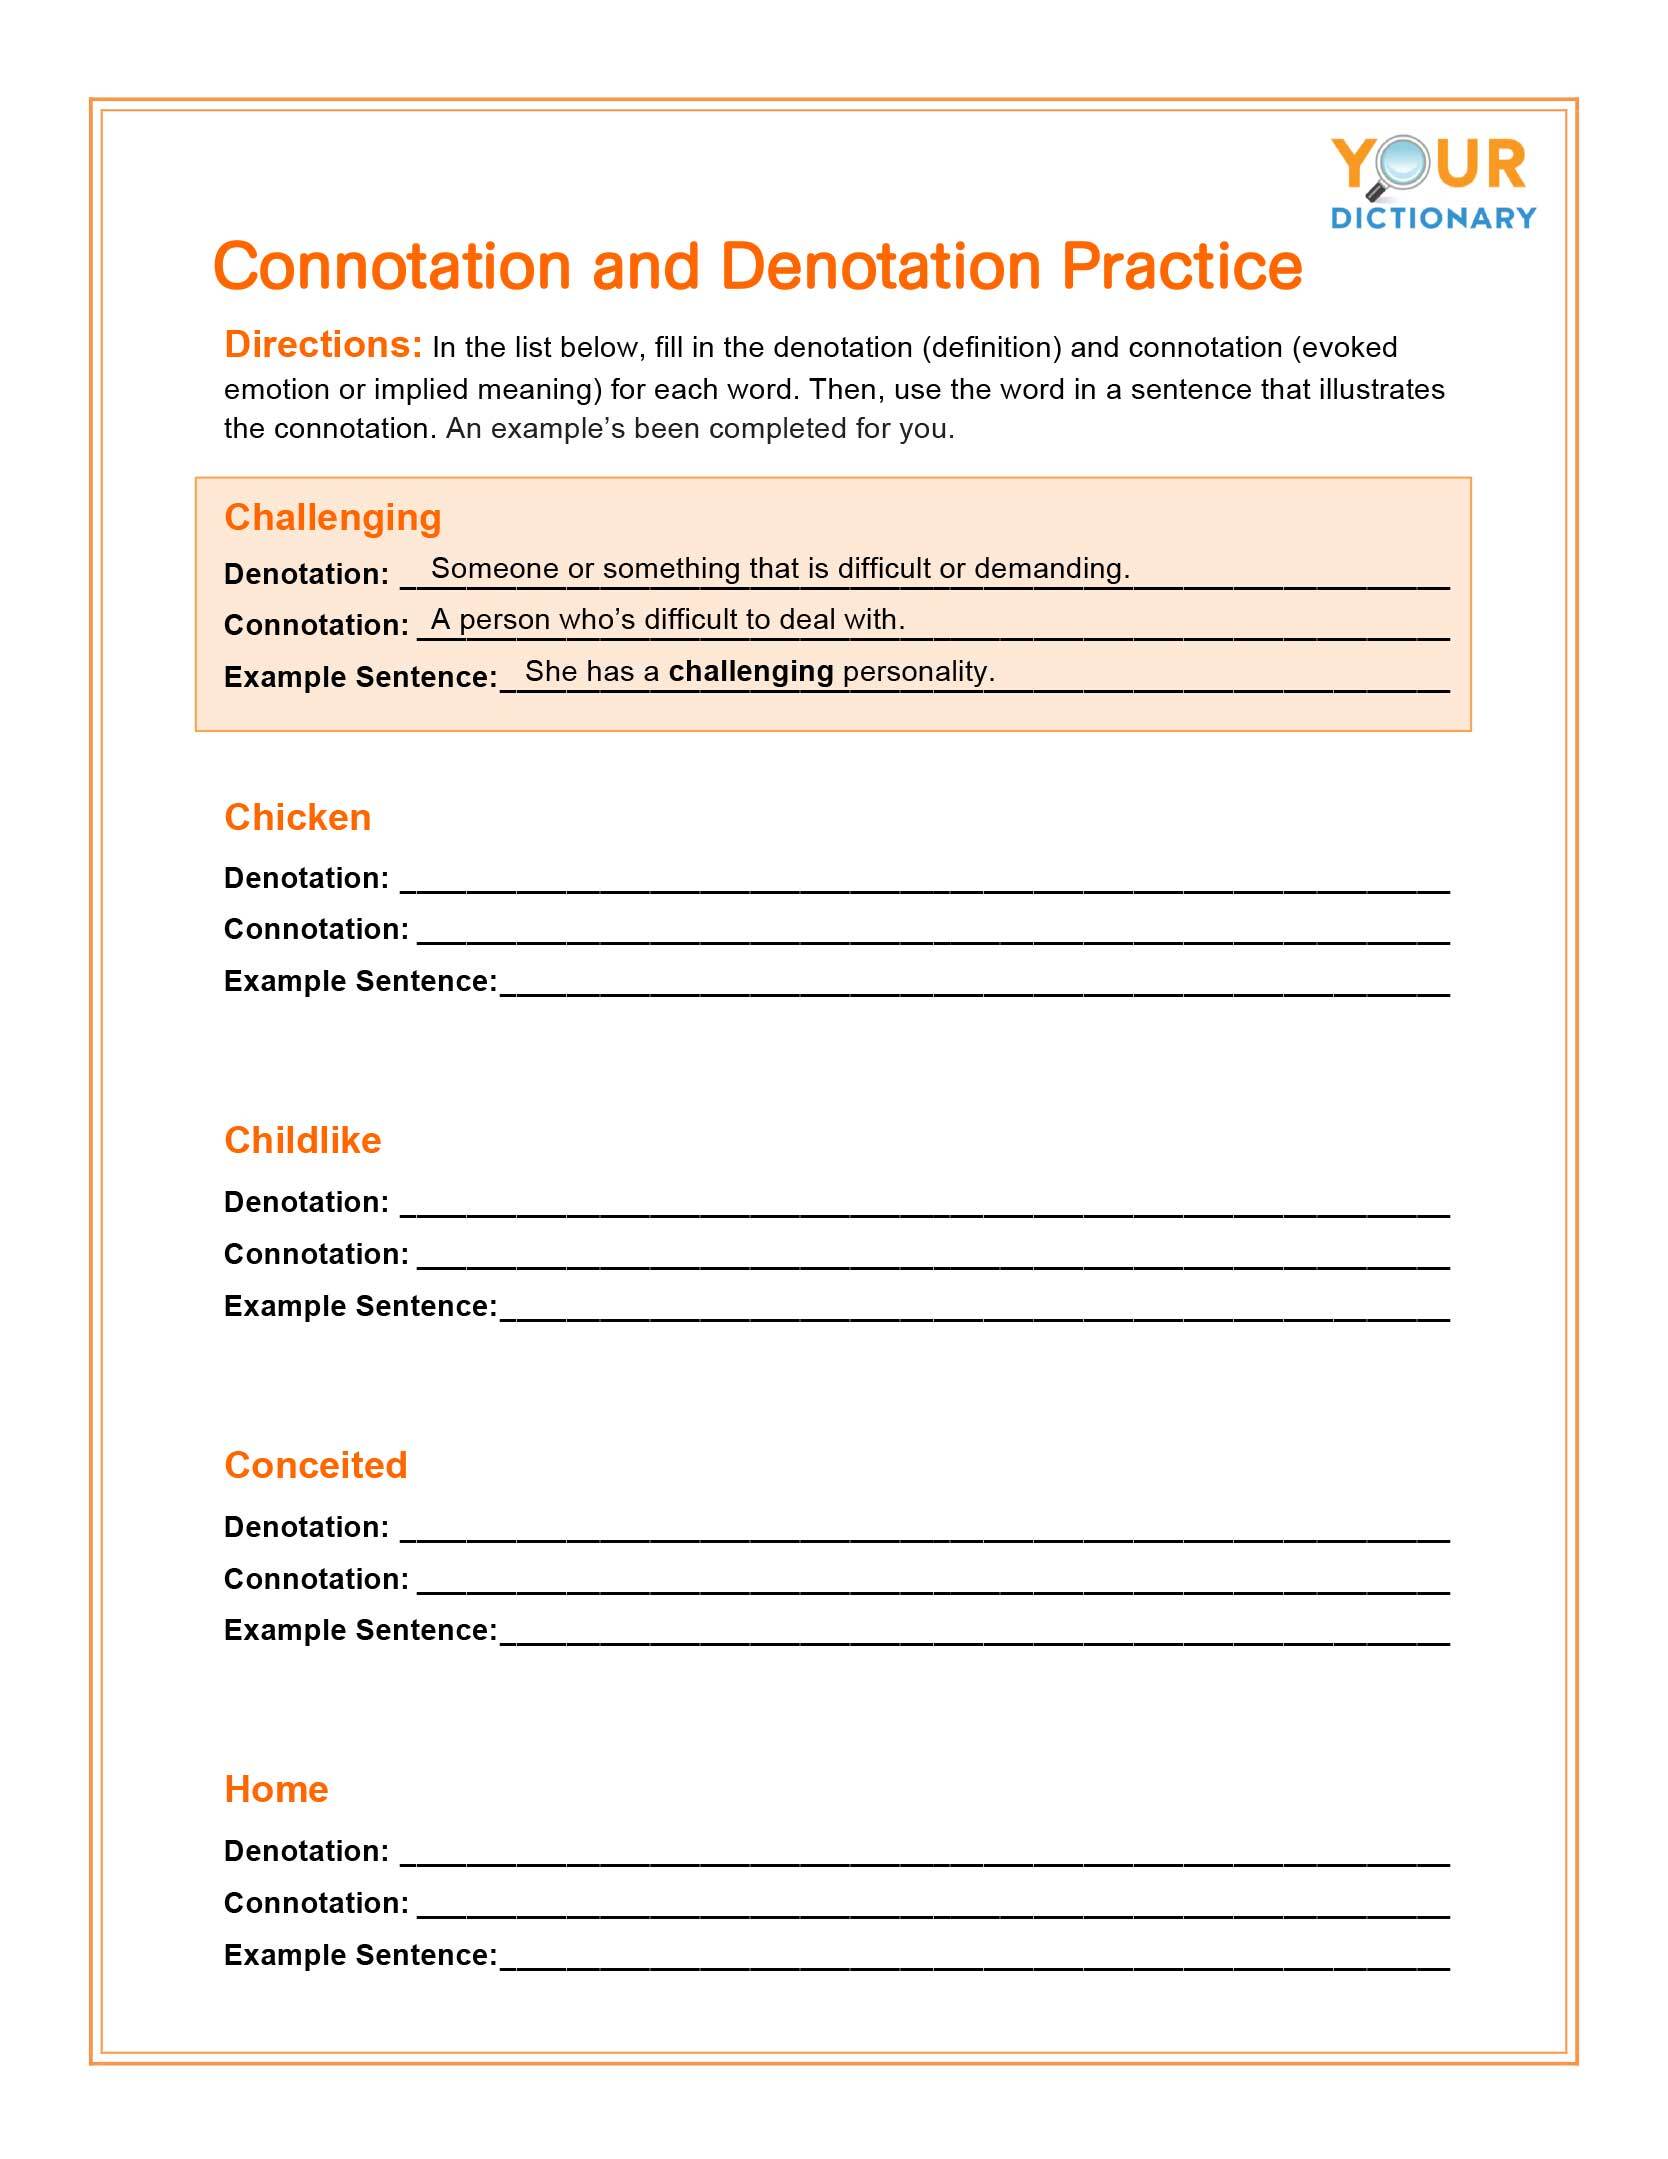 connotation and denotation practice worksheet